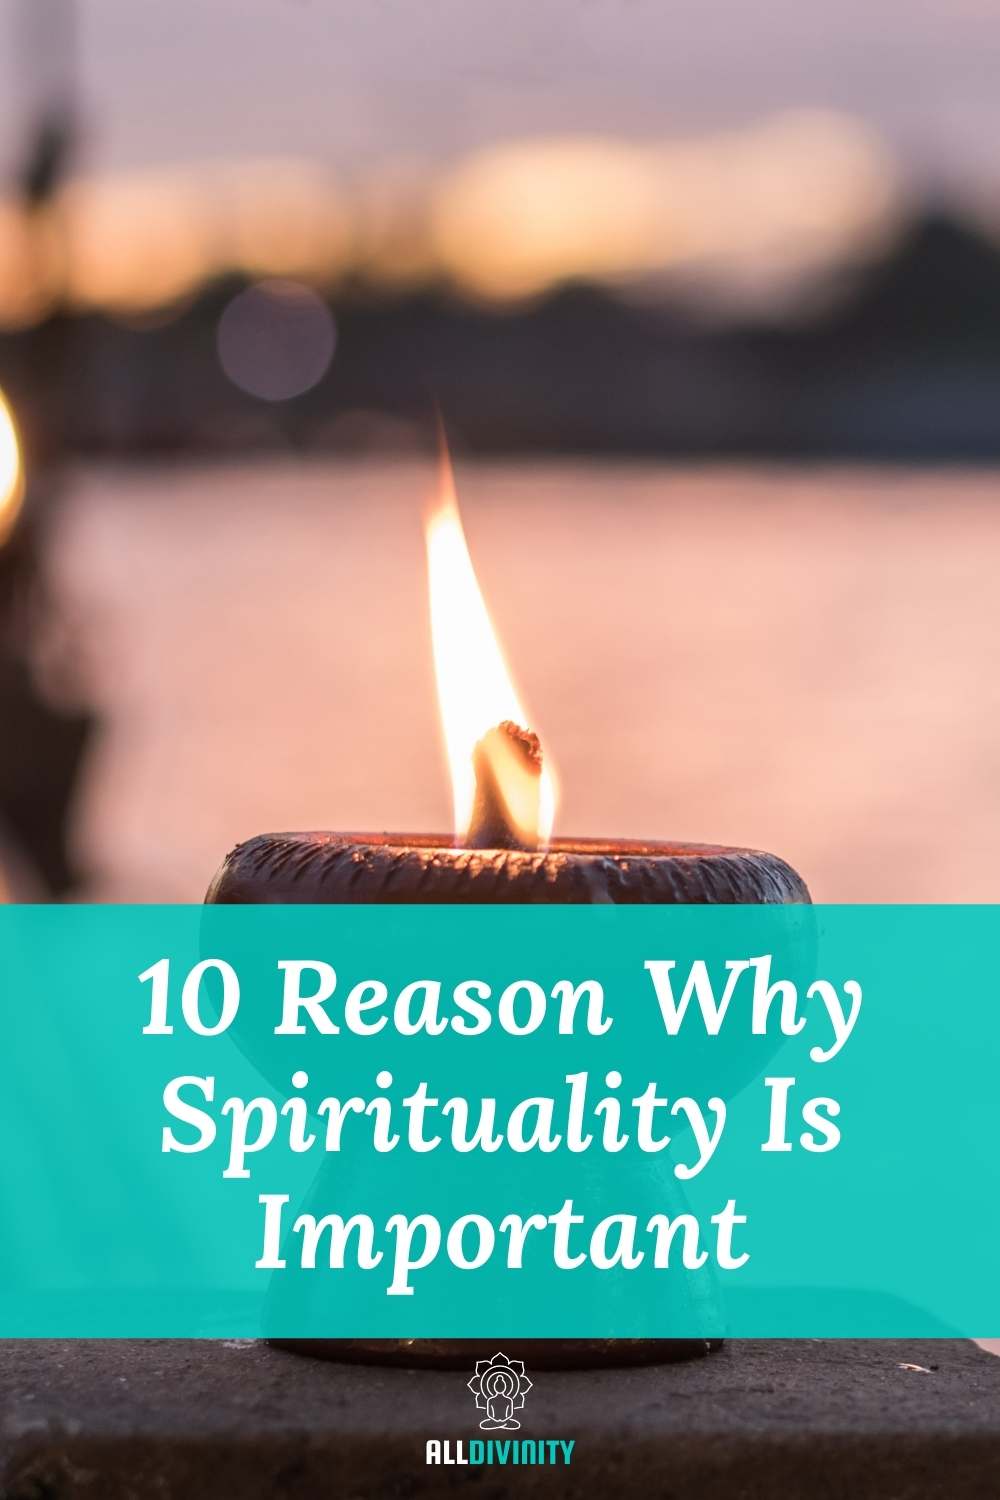 10 Reason Why Spirituality Is Important - All Divinity - Your Spiritual ...